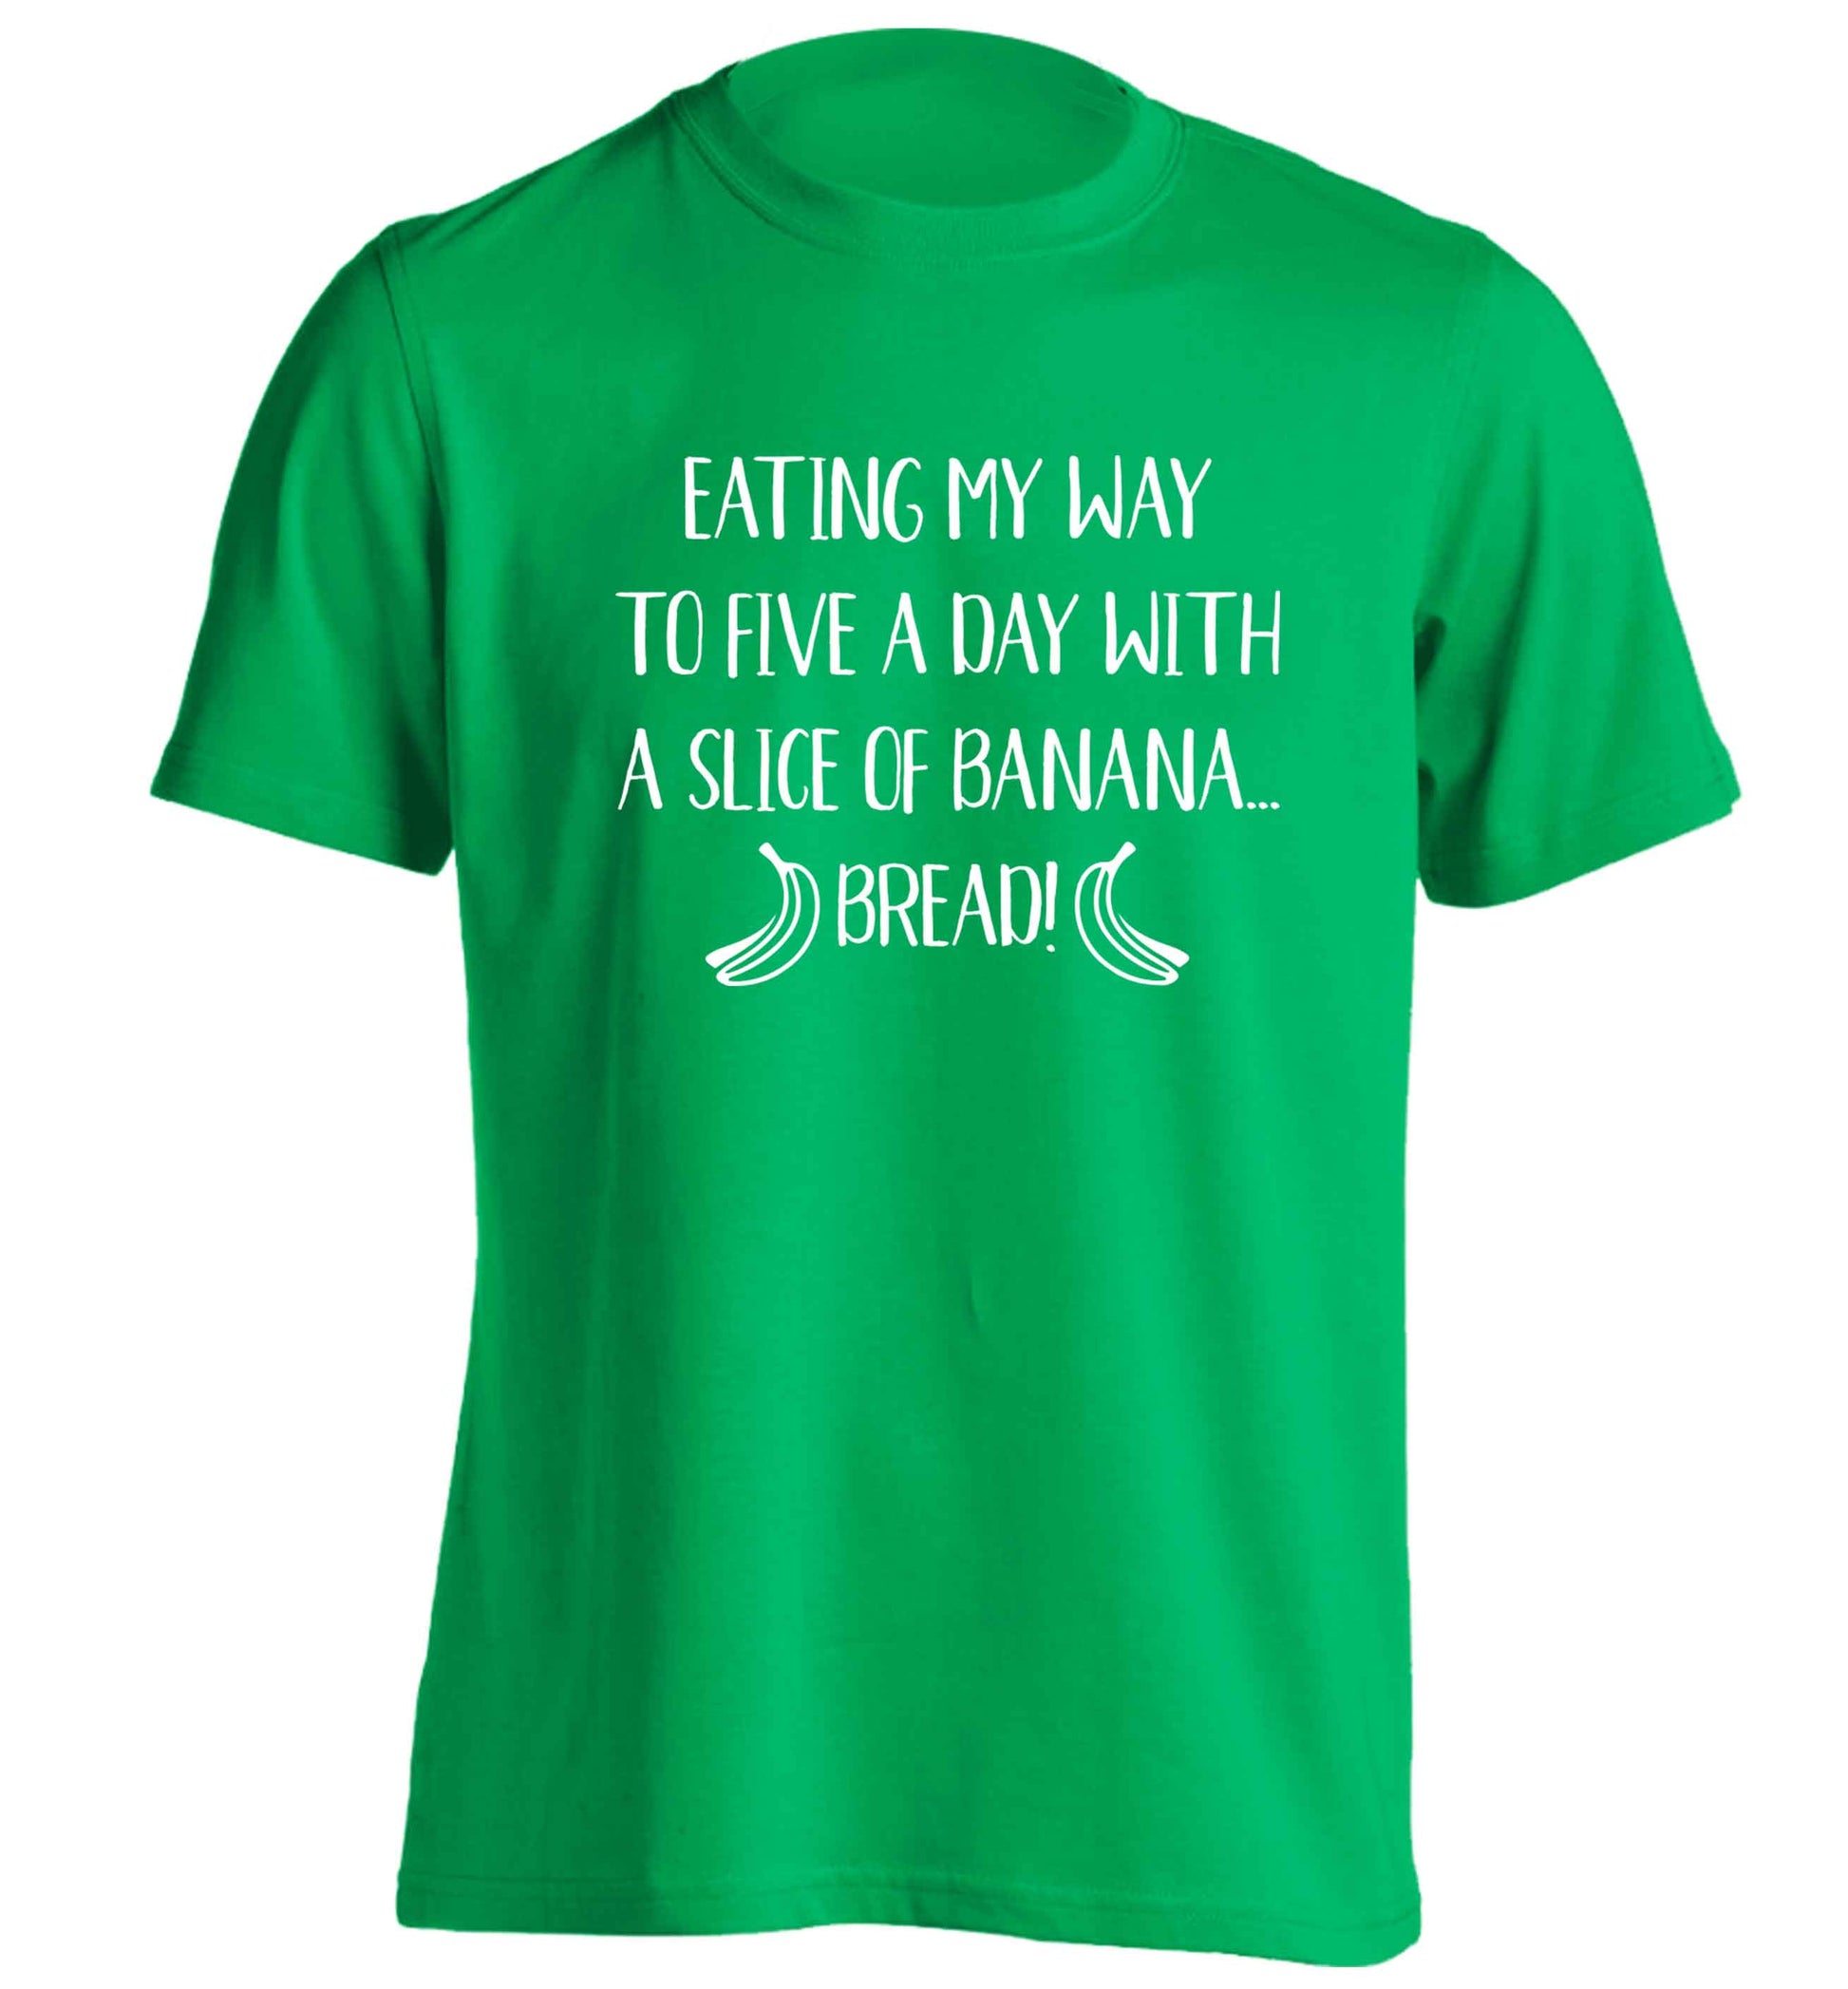 Eating my way to five a day with a slice of banana bread adults unisex green Tshirt 2XL